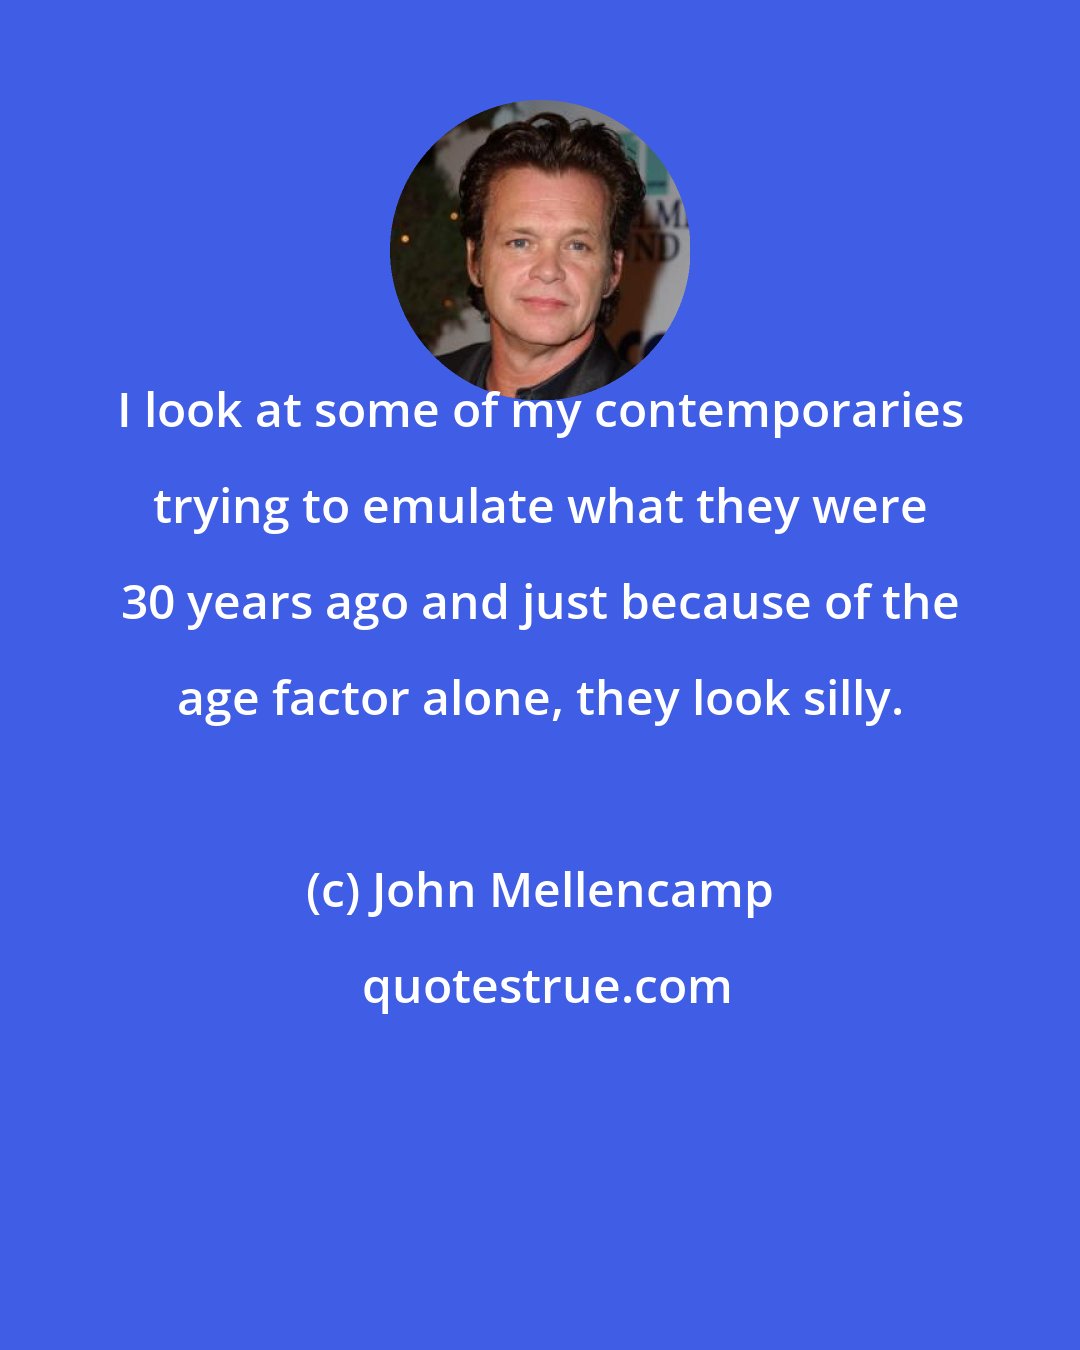 John Mellencamp: I look at some of my contemporaries trying to emulate what they were 30 years ago and just because of the age factor alone, they look silly.